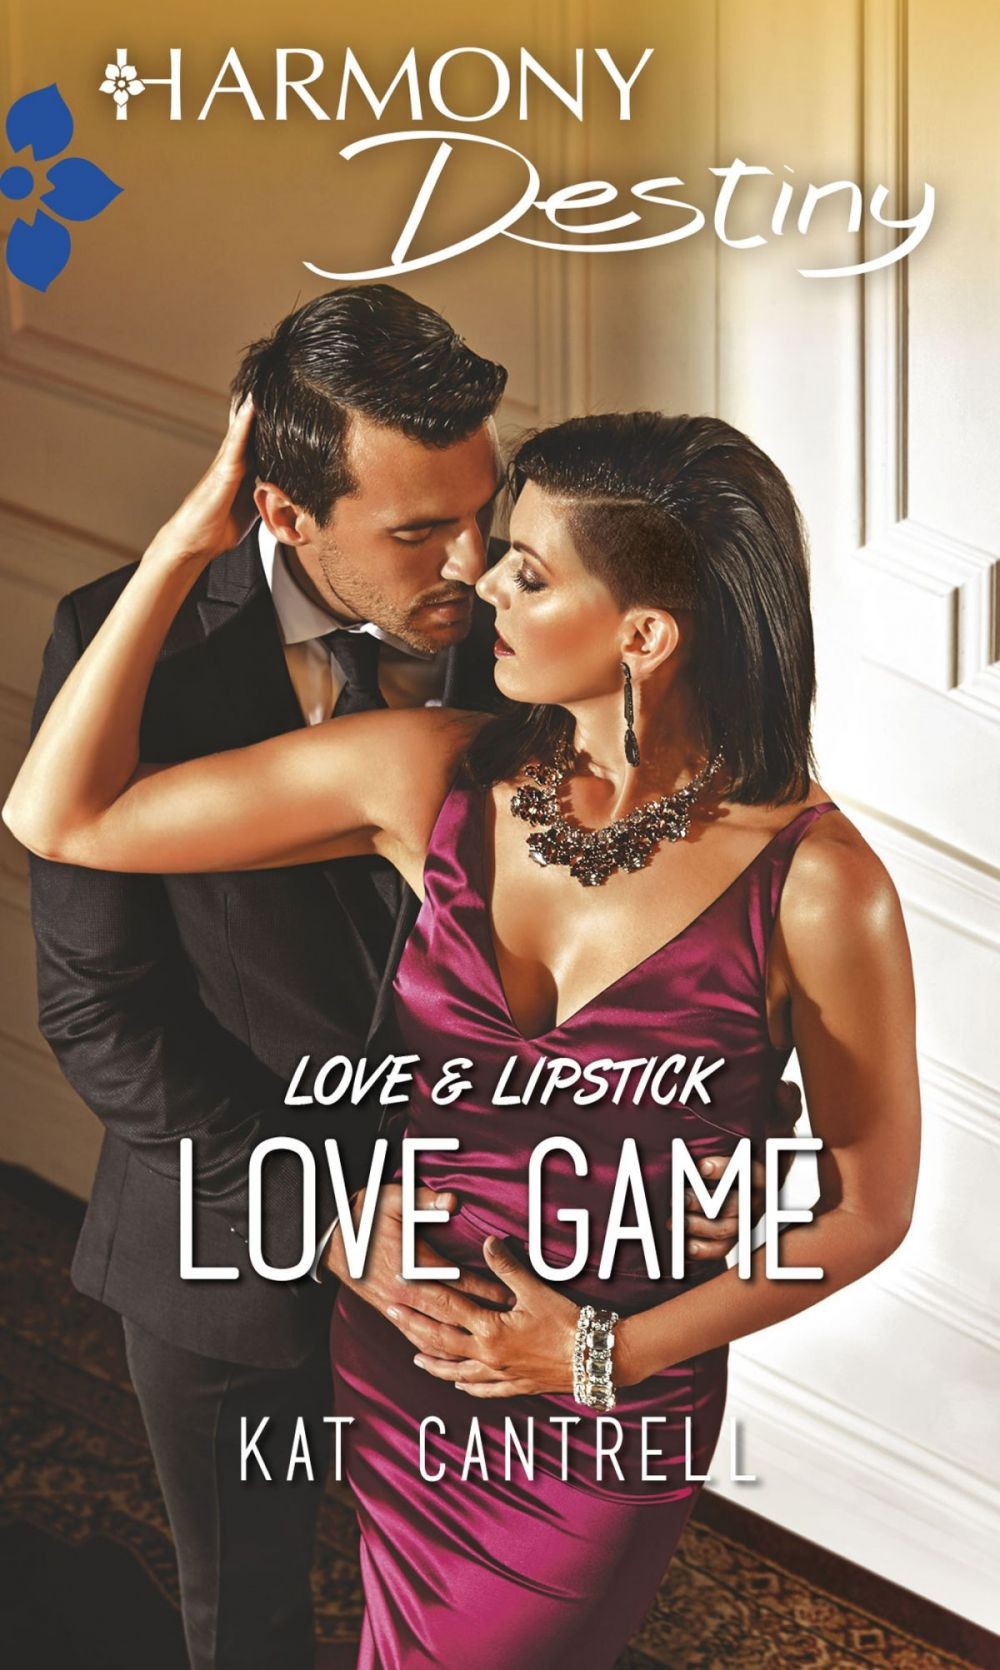 Love game - Librerie.coop